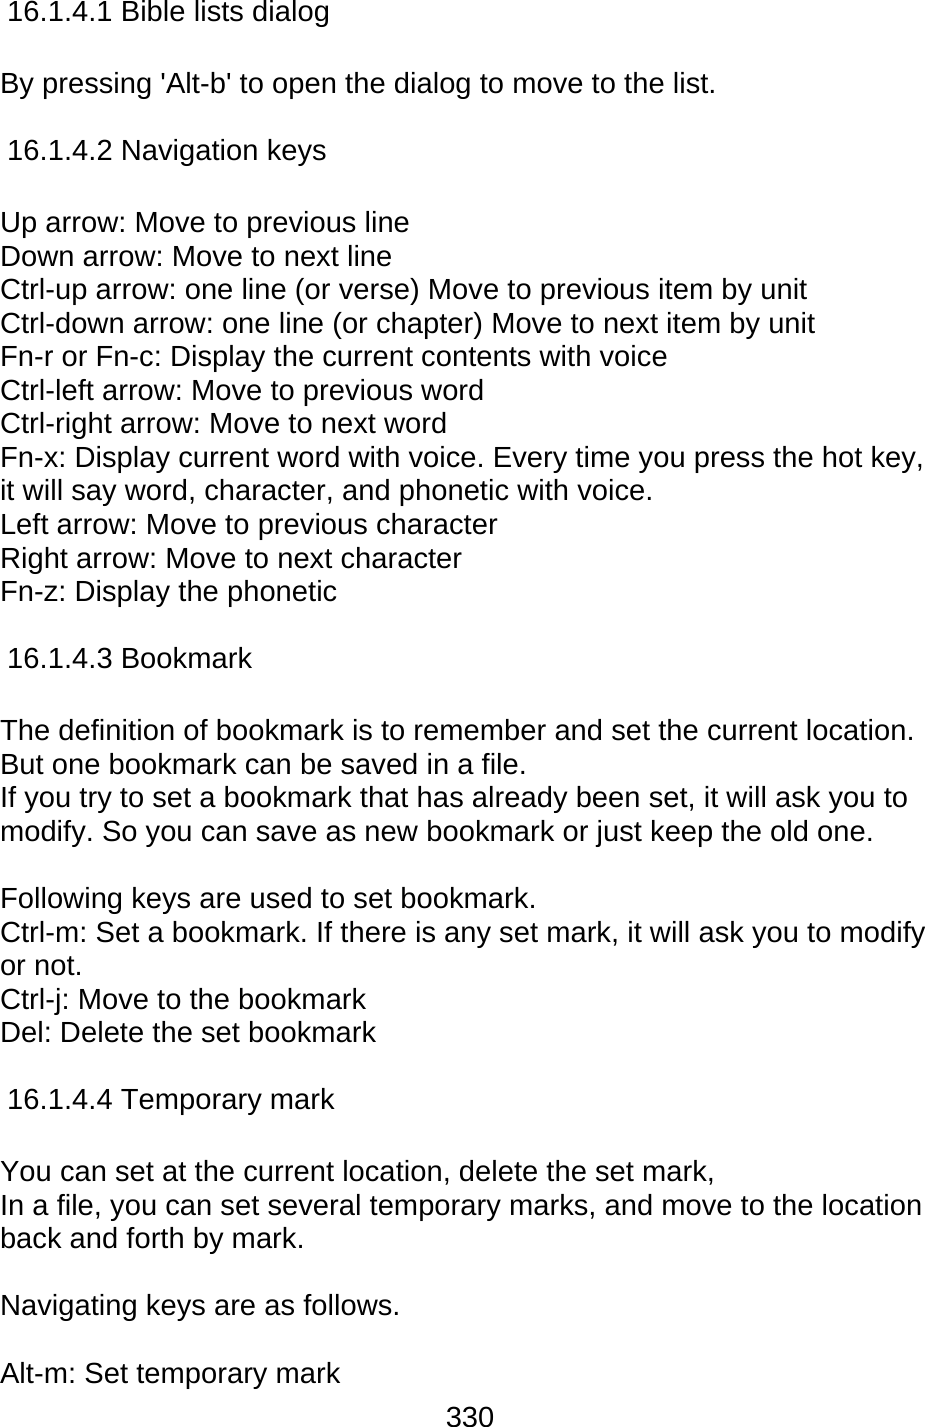 330  16.1.4.1 Bible lists dialog  By pressing &apos;Alt-b&apos; to open the dialog to move to the list.  16.1.4.2 Navigation keys  Up arrow: Move to previous line   Down arrow: Move to next line Ctrl-up arrow: one line (or verse) Move to previous item by unit Ctrl-down arrow: one line (or chapter) Move to next item by unit Fn-r or Fn-c: Display the current contents with voice Ctrl-left arrow: Move to previous word Ctrl-right arrow: Move to next word Fn-x: Display current word with voice. Every time you press the hot key, it will say word, character, and phonetic with voice. Left arrow: Move to previous character Right arrow: Move to next character Fn-z: Display the phonetic  16.1.4.3 Bookmark  The definition of bookmark is to remember and set the current location. But one bookmark can be saved in a file.   If you try to set a bookmark that has already been set, it will ask you to modify. So you can save as new bookmark or just keep the old one.  Following keys are used to set bookmark. Ctrl-m: Set a bookmark. If there is any set mark, it will ask you to modify or not.   Ctrl-j: Move to the bookmark Del: Delete the set bookmark  16.1.4.4 Temporary mark  You can set at the current location, delete the set mark,   In a file, you can set several temporary marks, and move to the location back and forth by mark.    Navigating keys are as follows.  Alt-m: Set temporary mark 